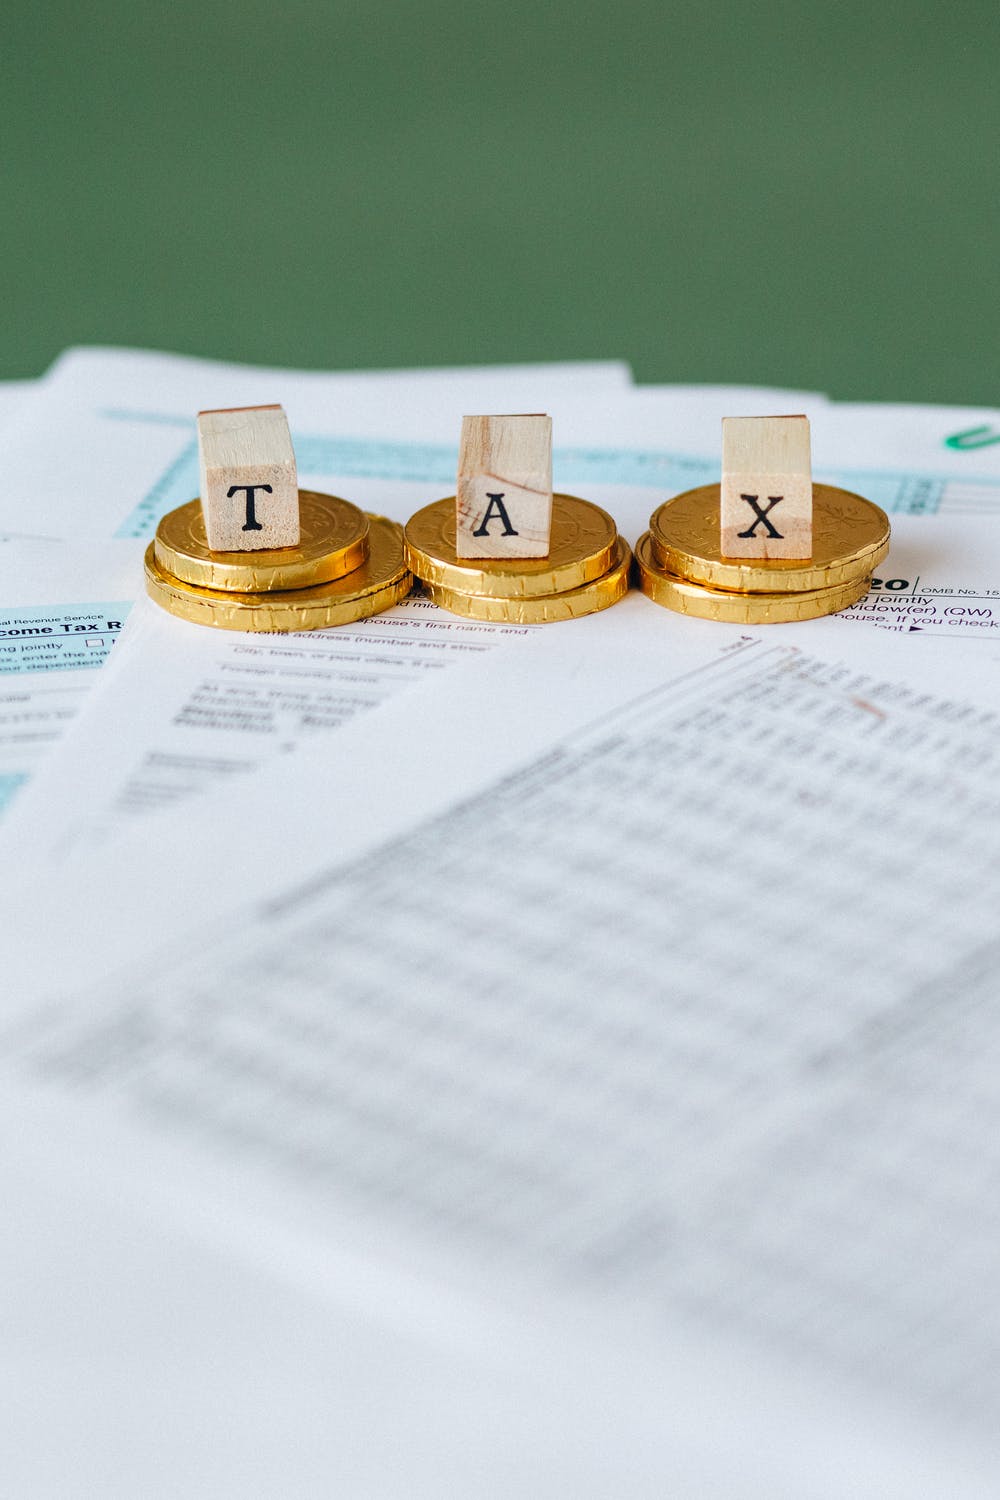 How Do Professionals Keep You Prepared for an IRS Tax Audit